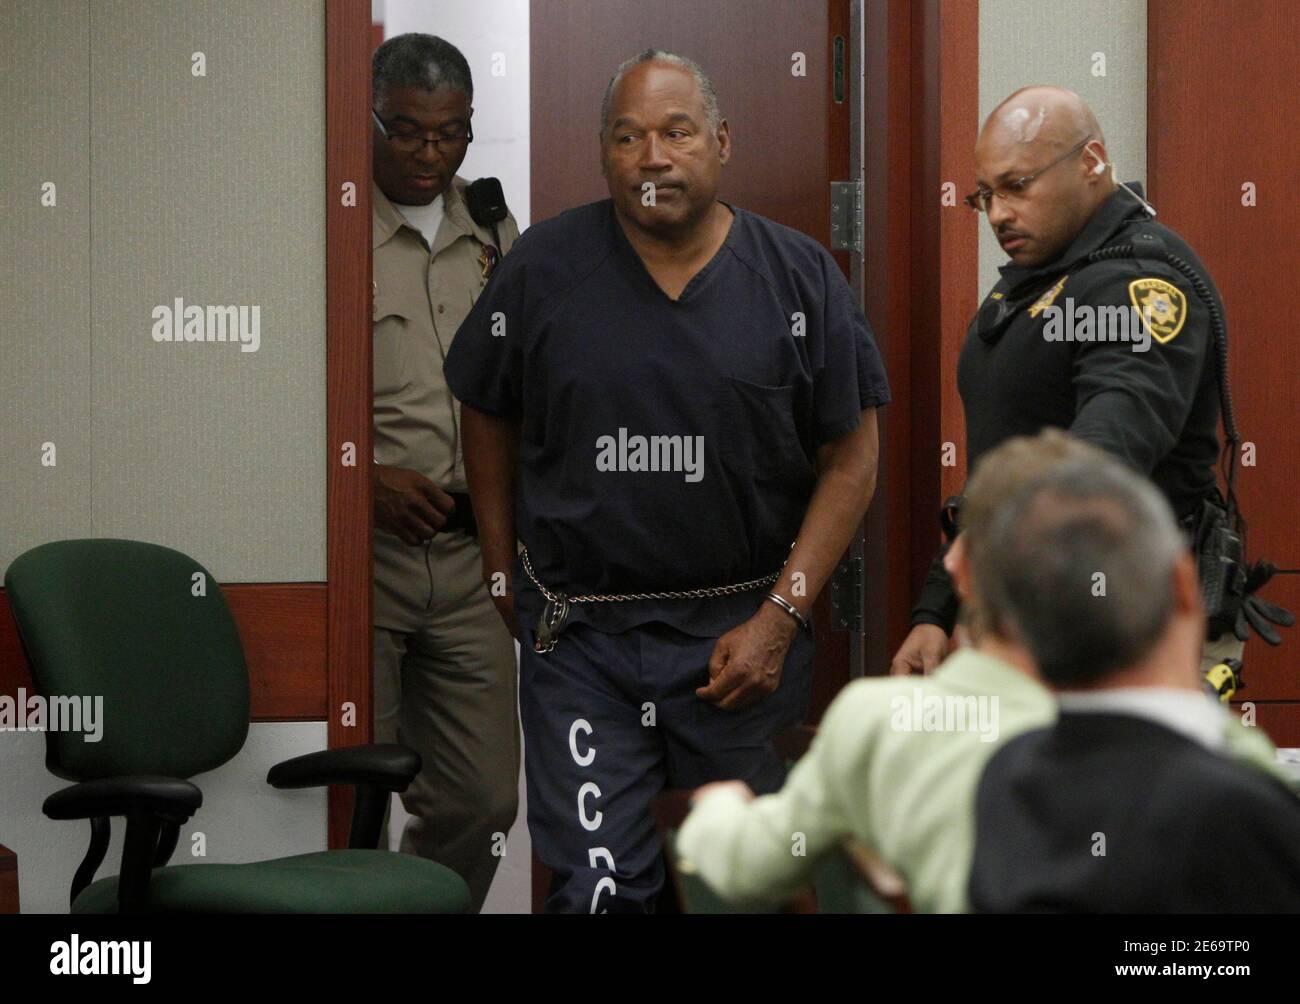 O.J. Simpson arrives at an evidentiary hearing in Clark County District Court in Las Vegas, Nevada May 16, 2013. O.J. Simpson, the former football star famously acquitted of murder in 1995, took the witness stand in a Las Vegas courtroom on Wednesday seeking a new trial in an armed-robbery case that sent him to prison five years ago.    REUTERS/Steve Marcus  (UNITED STATES  - Tags: CRIME LAW ENTERTAINMENT SPORT) Stock Photo